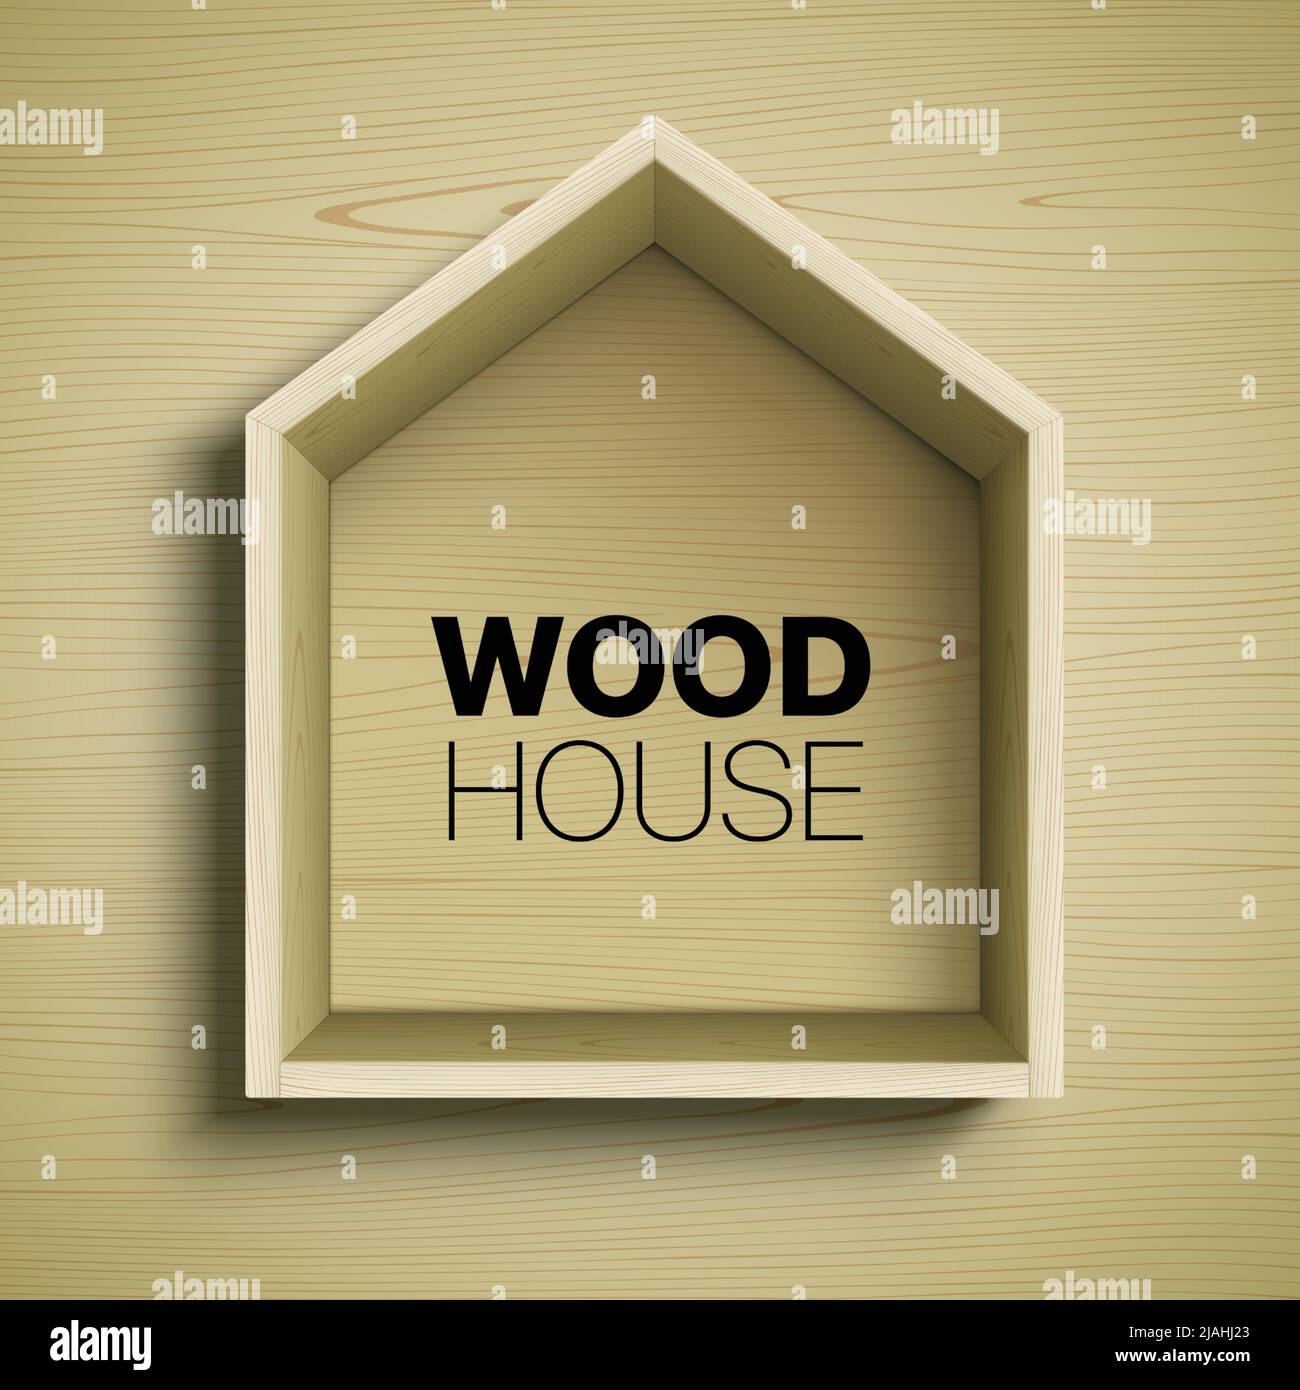 Wooden house frame on a wood texture background. Real estate modern vector banner design. Stock Vector